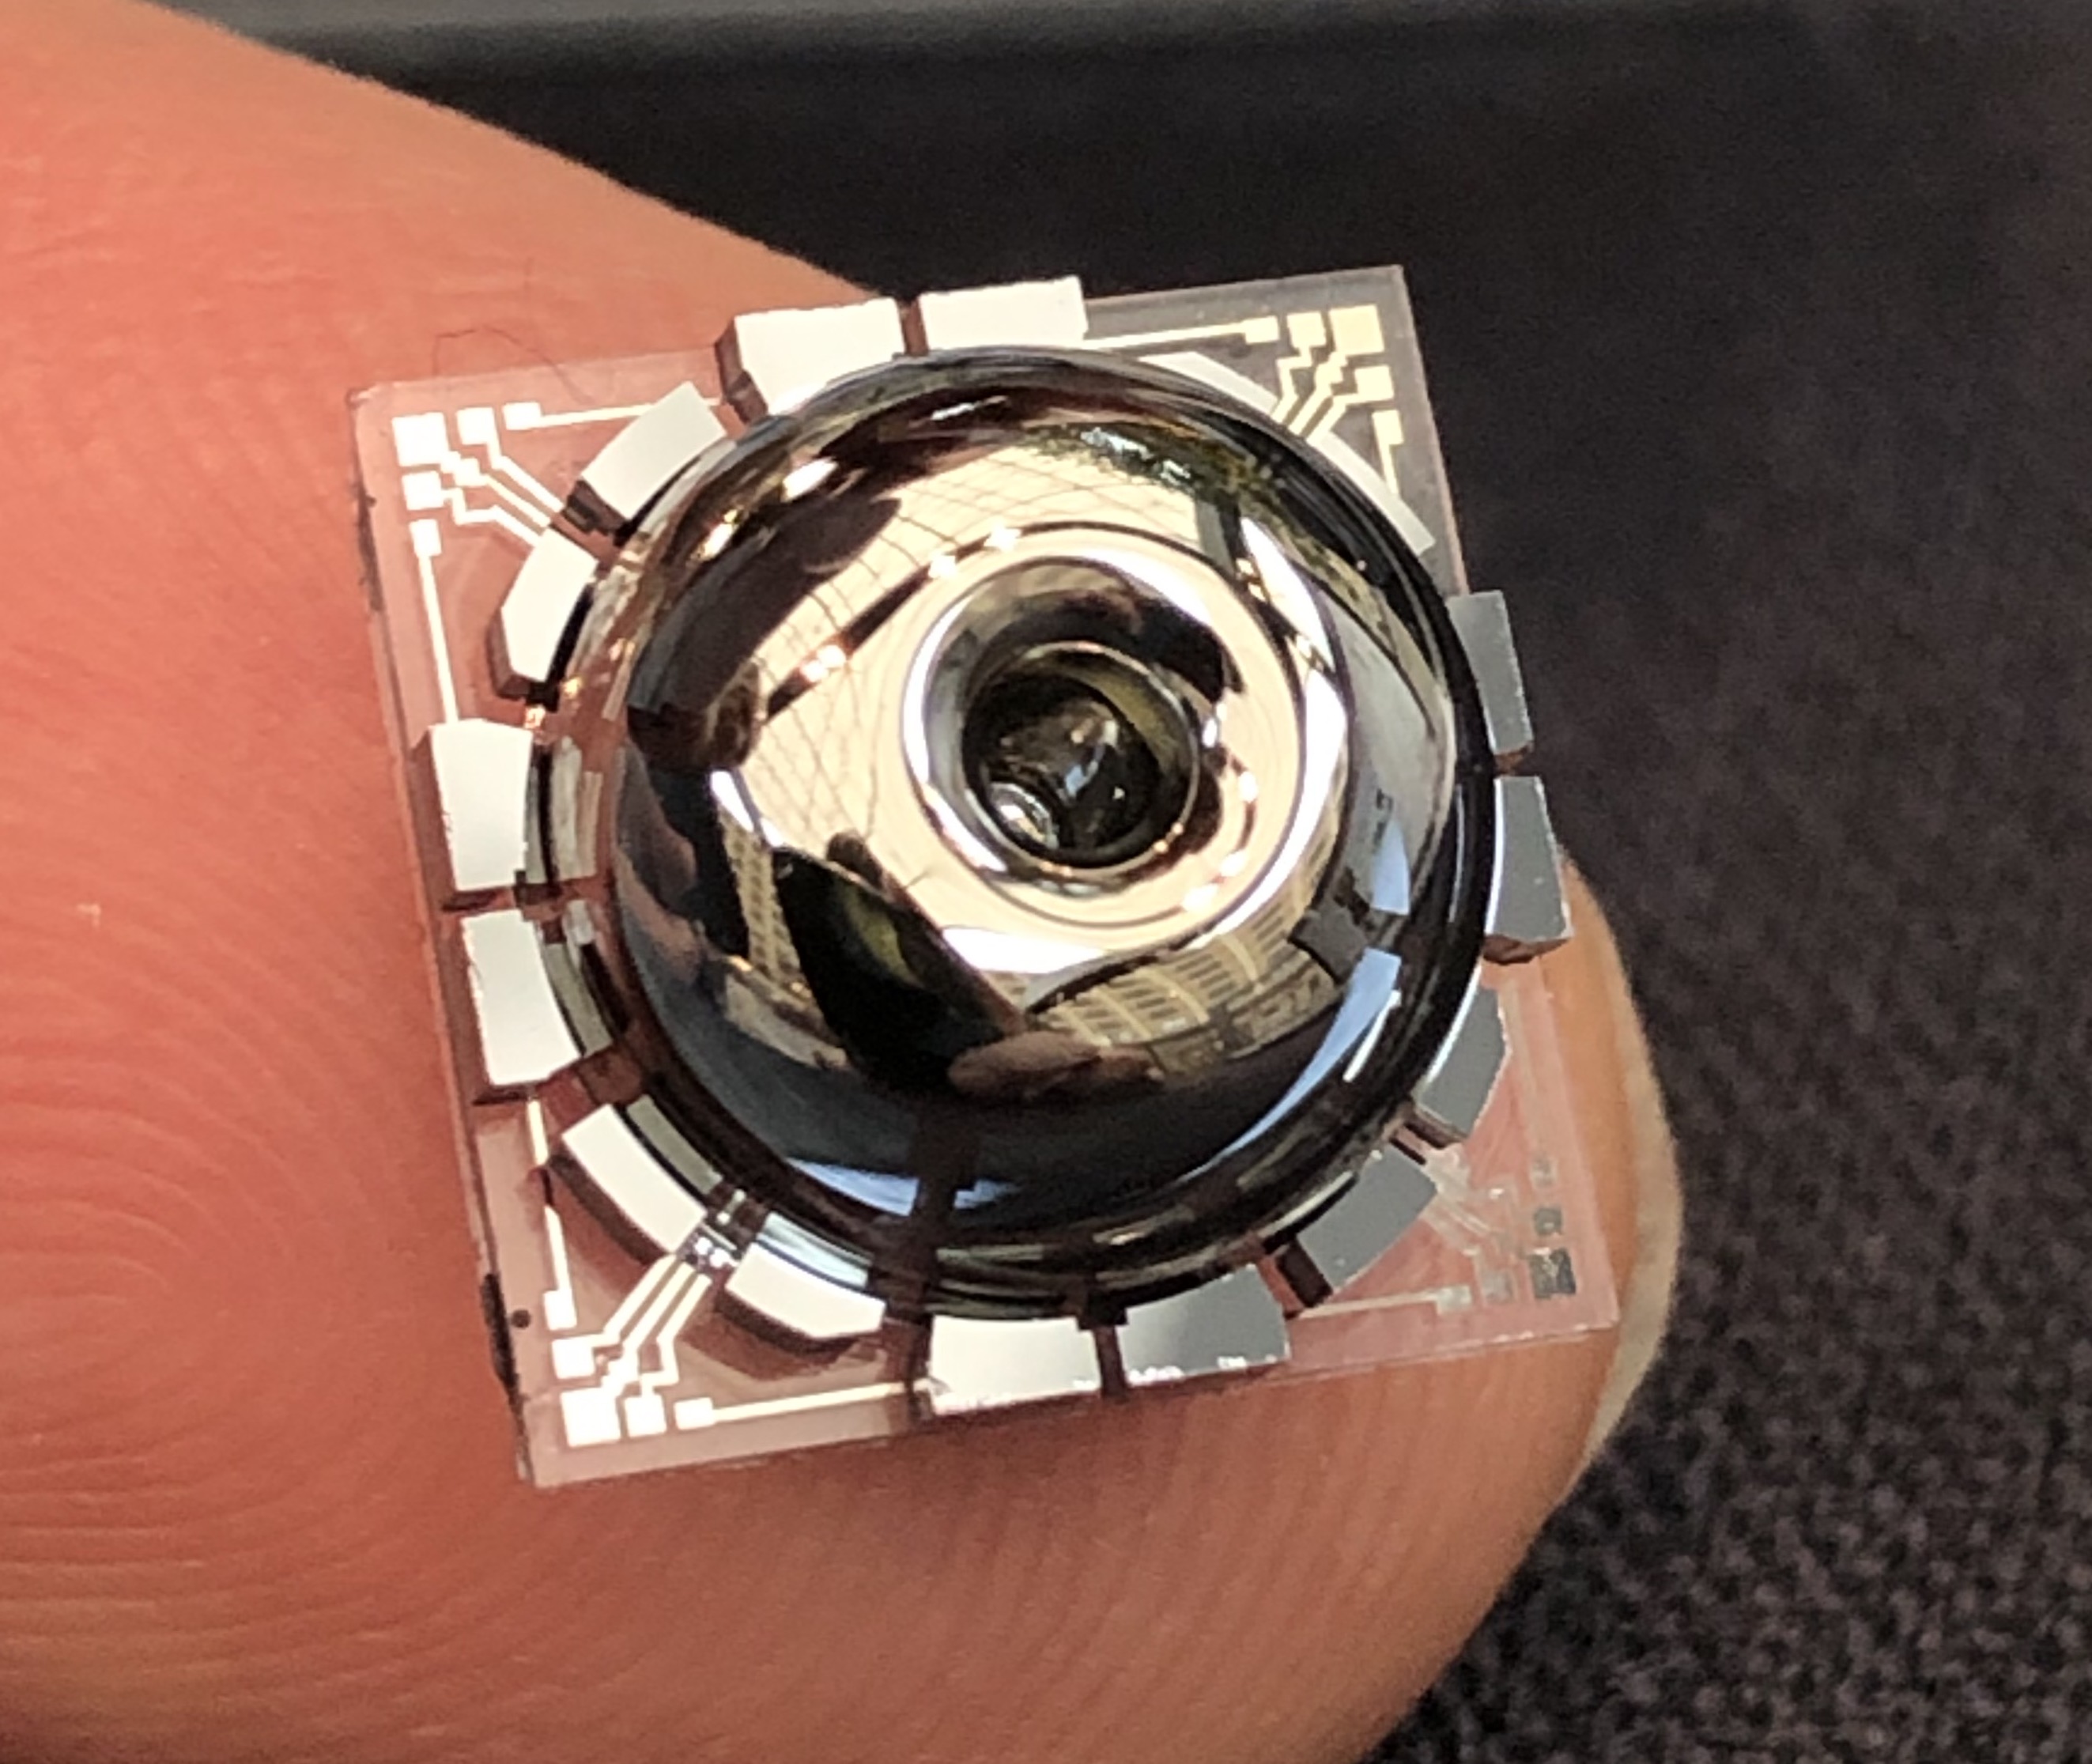 the resonator on a finger tip for scale